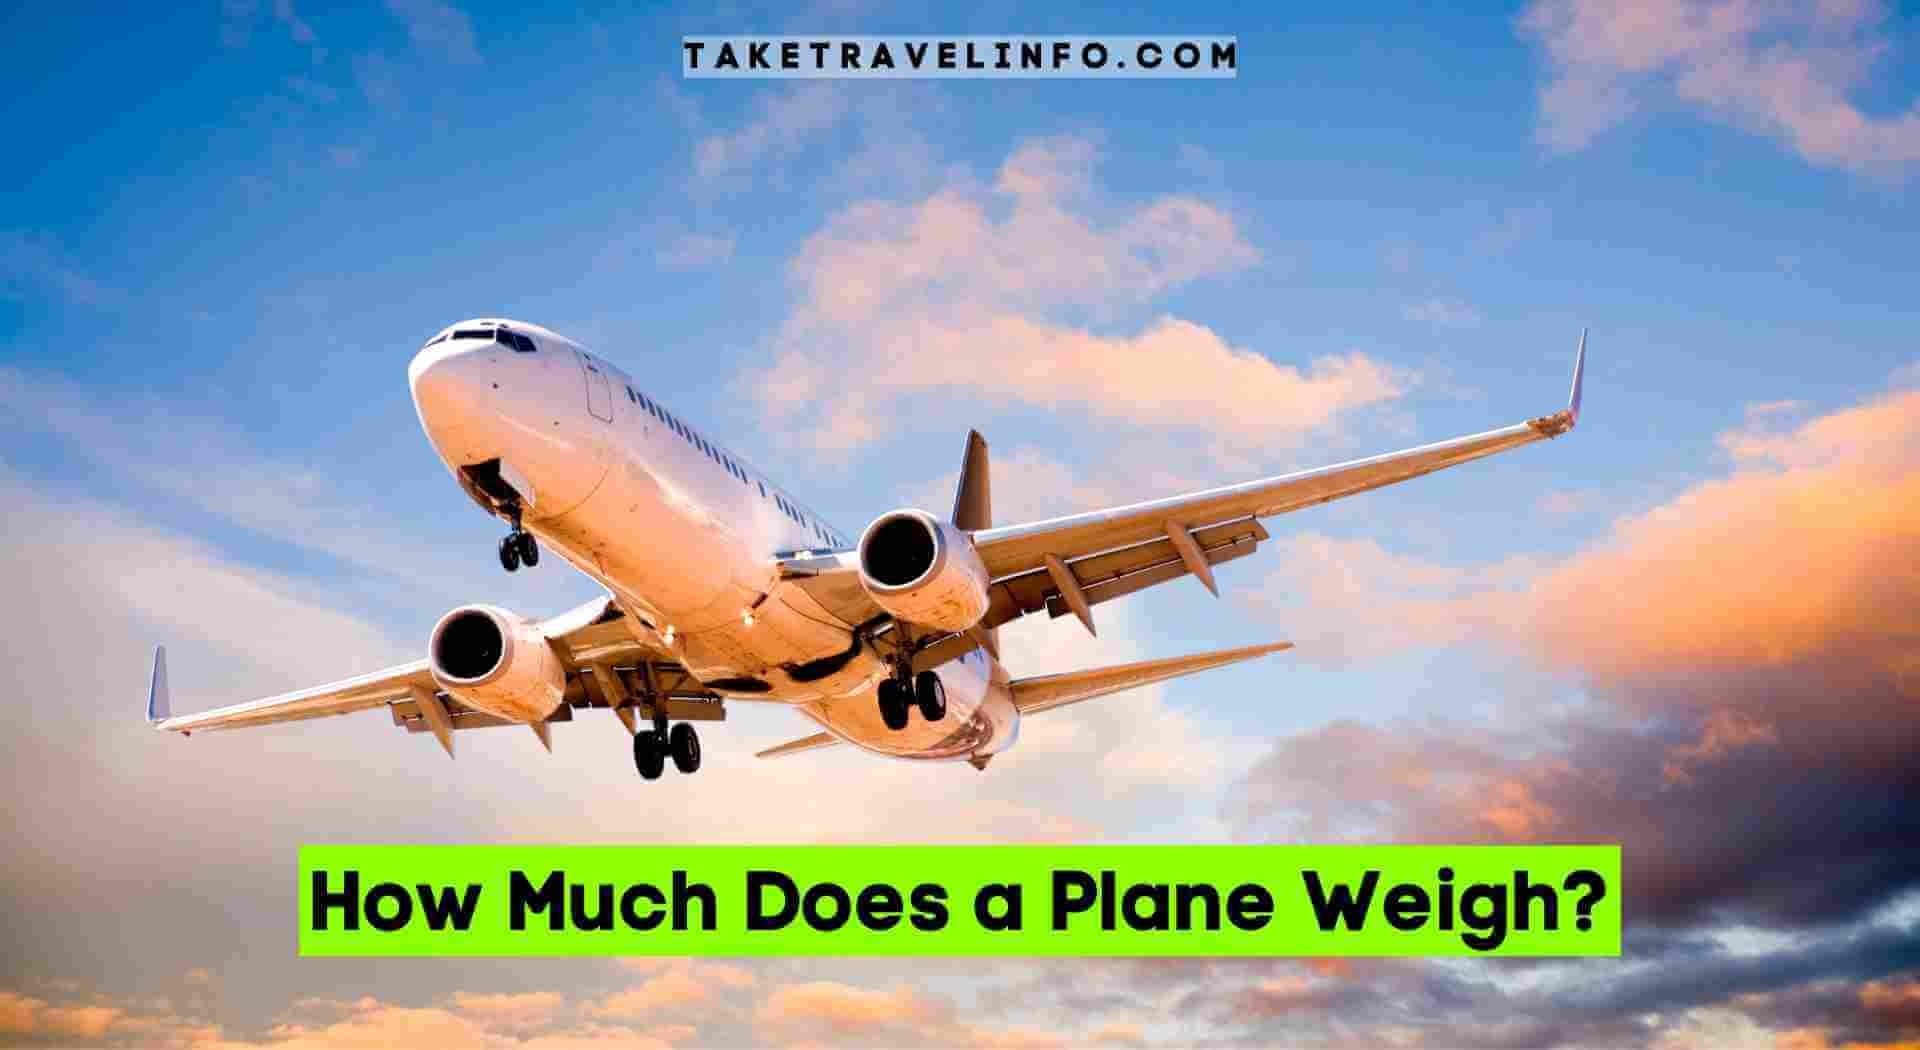 How Much Does a Plane Weigh?